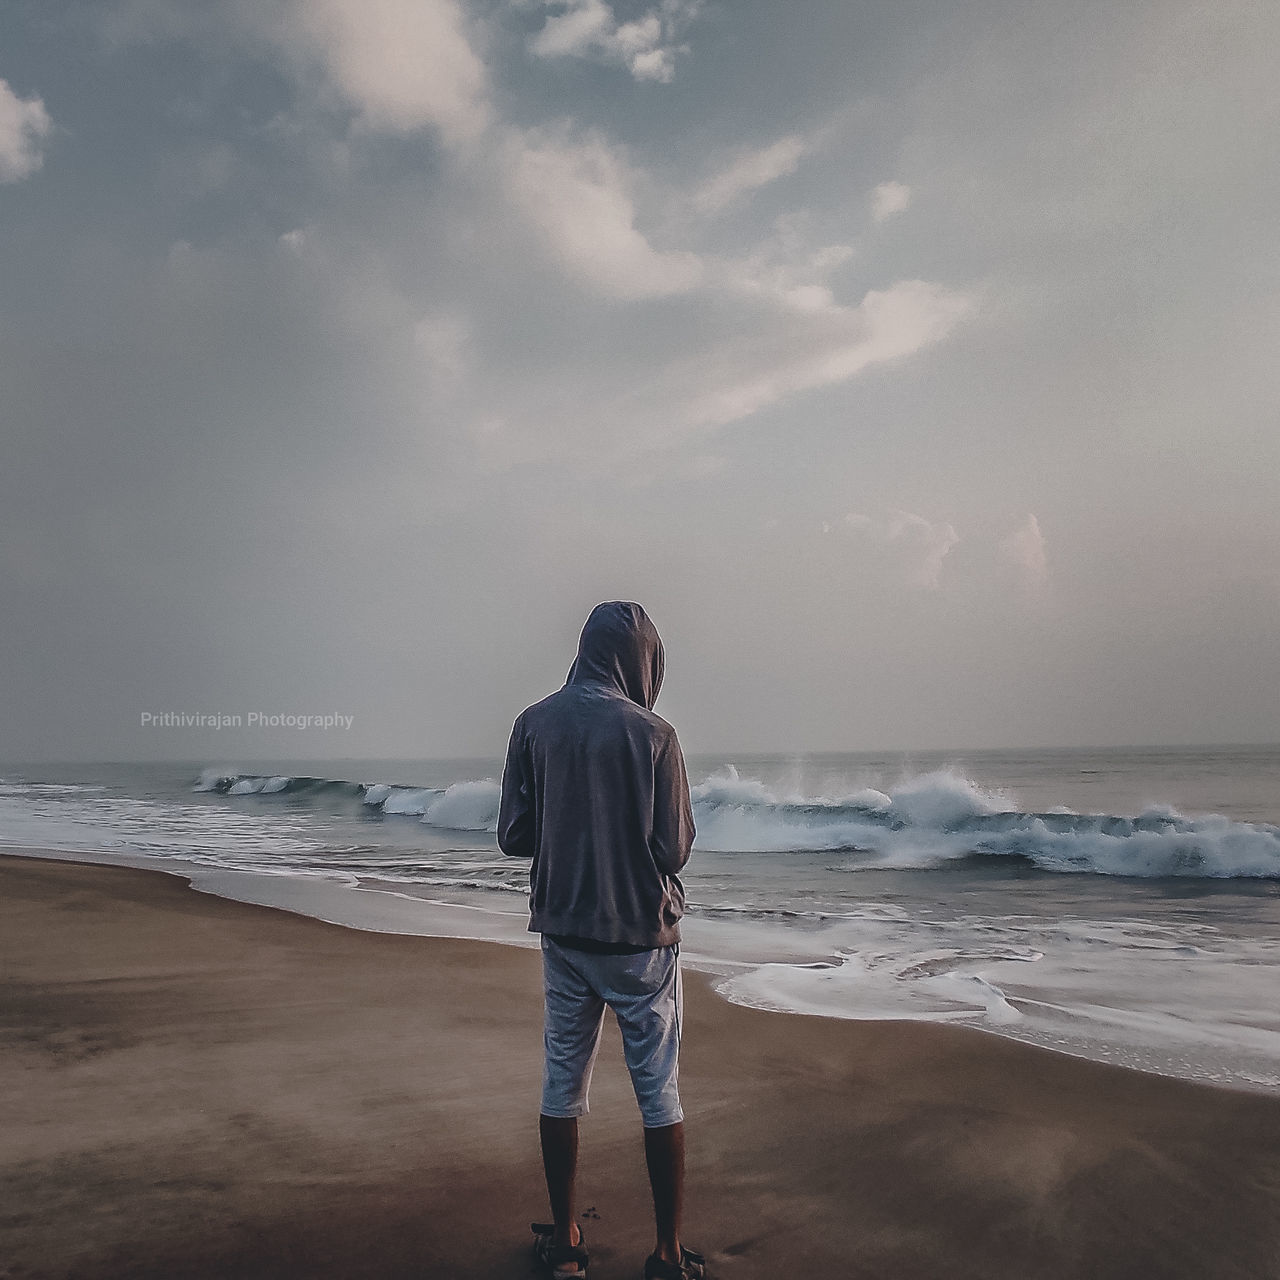 sea, ocean, beach, water, horizon, land, sky, coast, rear view, wave, cloud, shore, full length, body of water, one person, beauty in nature, horizon over water, nature, standing, sand, holiday, vacation, adult, trip, scenics - nature, casual clothing, men, leisure activity, wind wave, motion, solitude, lifestyles, tranquility, looking at view, outdoors, wind, contemplation, morning, relaxation, day, young adult, looking, environment, overcast, child, clothing, travel destinations, hood